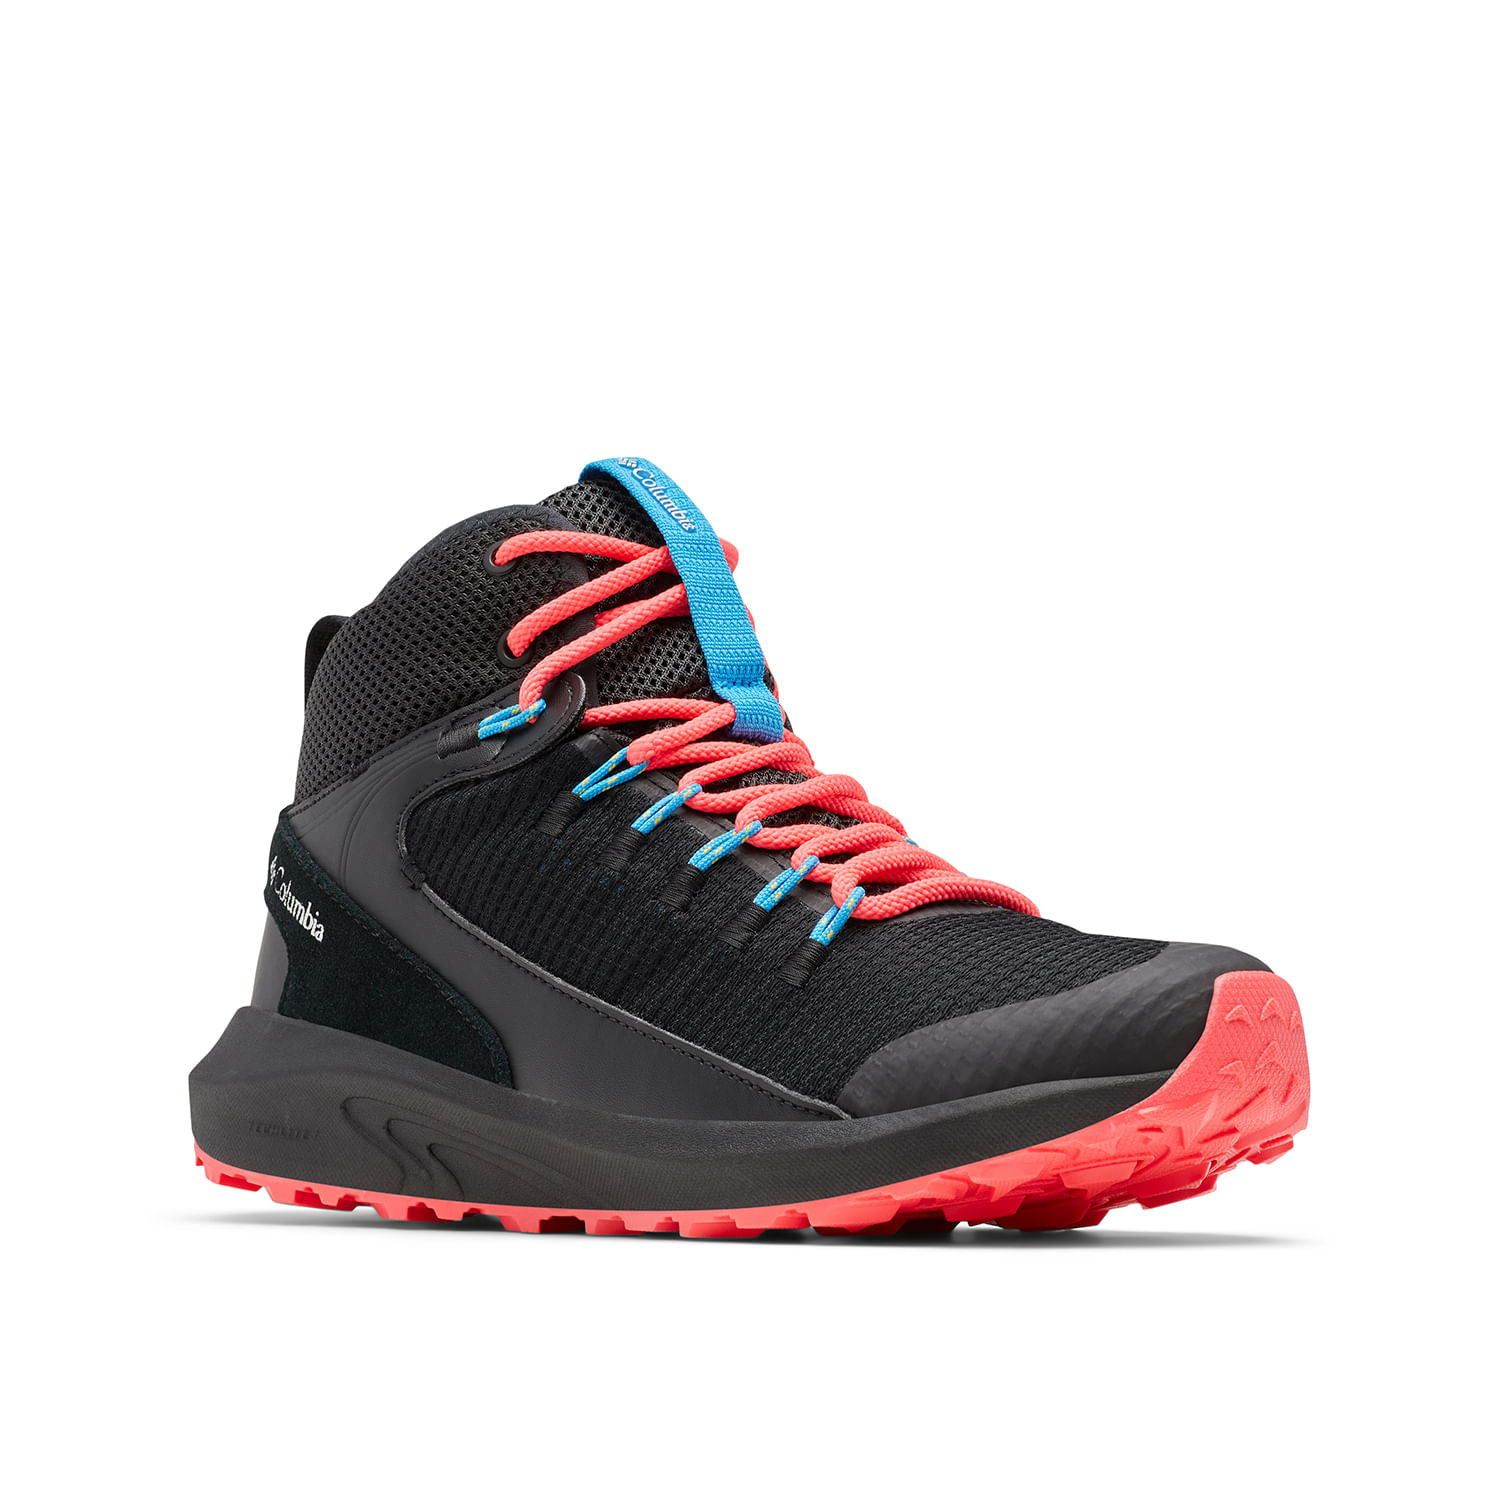 Botin Mujer Trailstor mid waterp